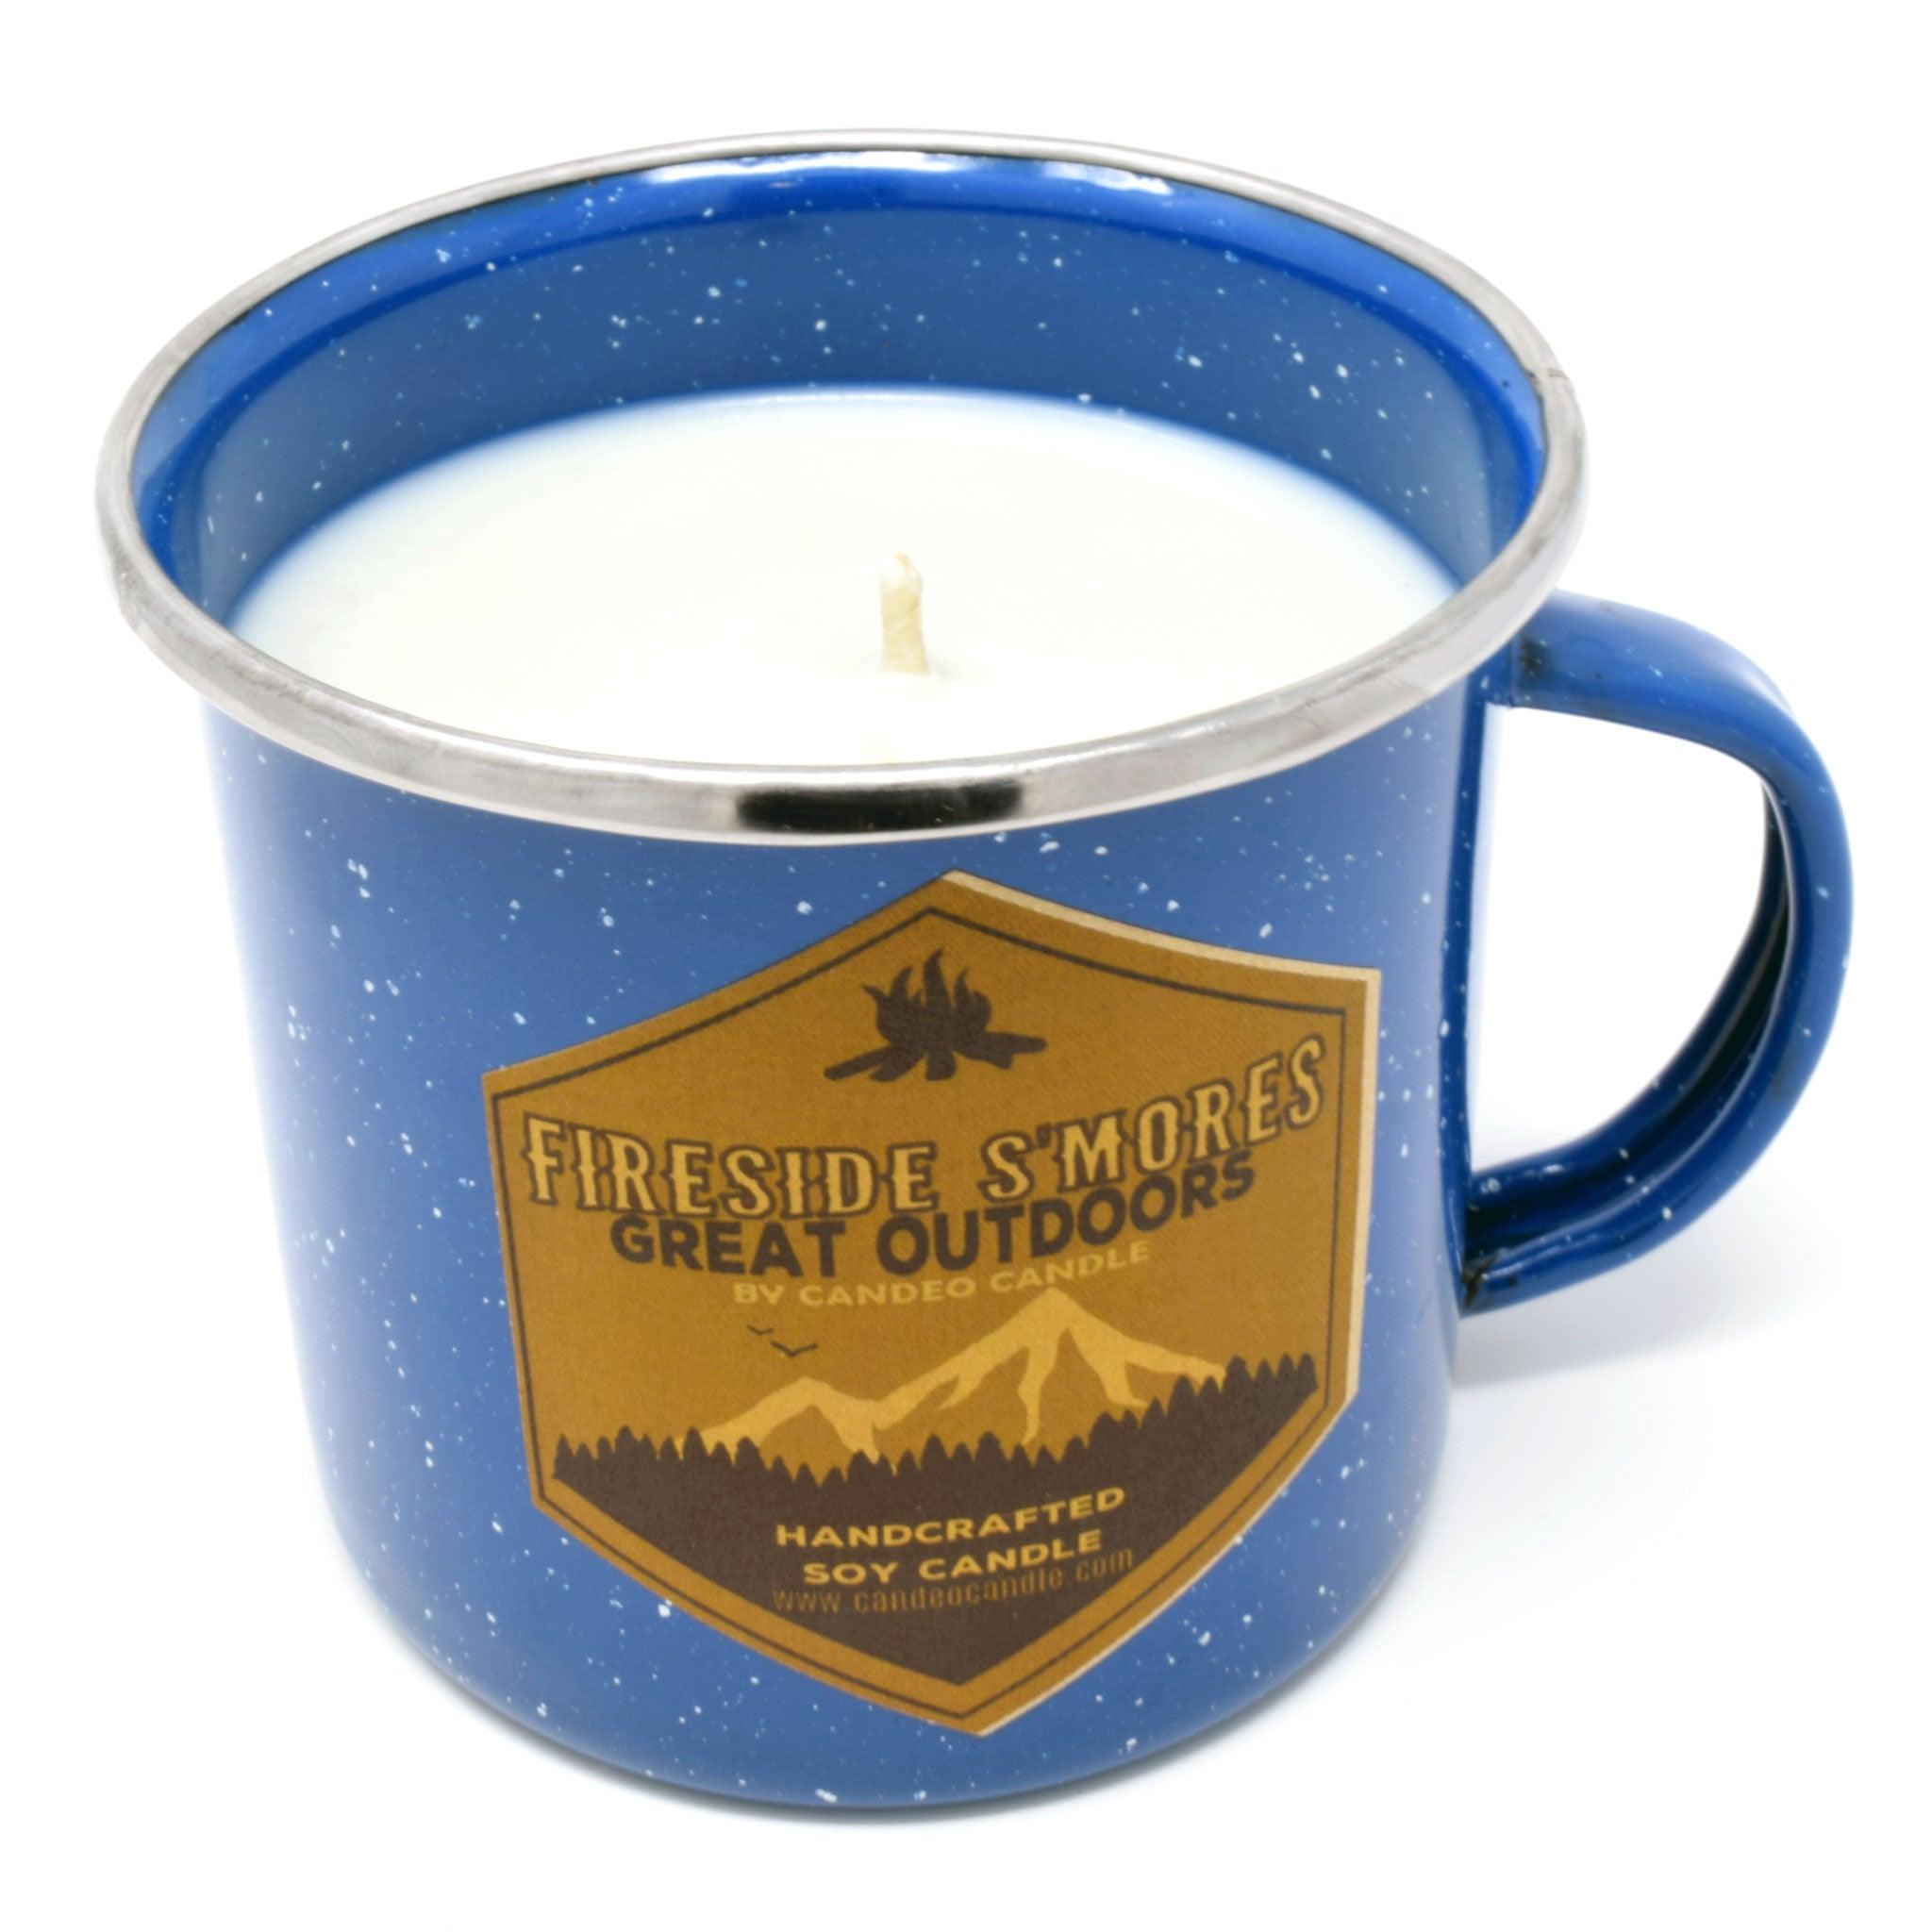 Fireside S'mores, Soy Candle in Enamel Camping Mug, 10oz - Candeo Candle